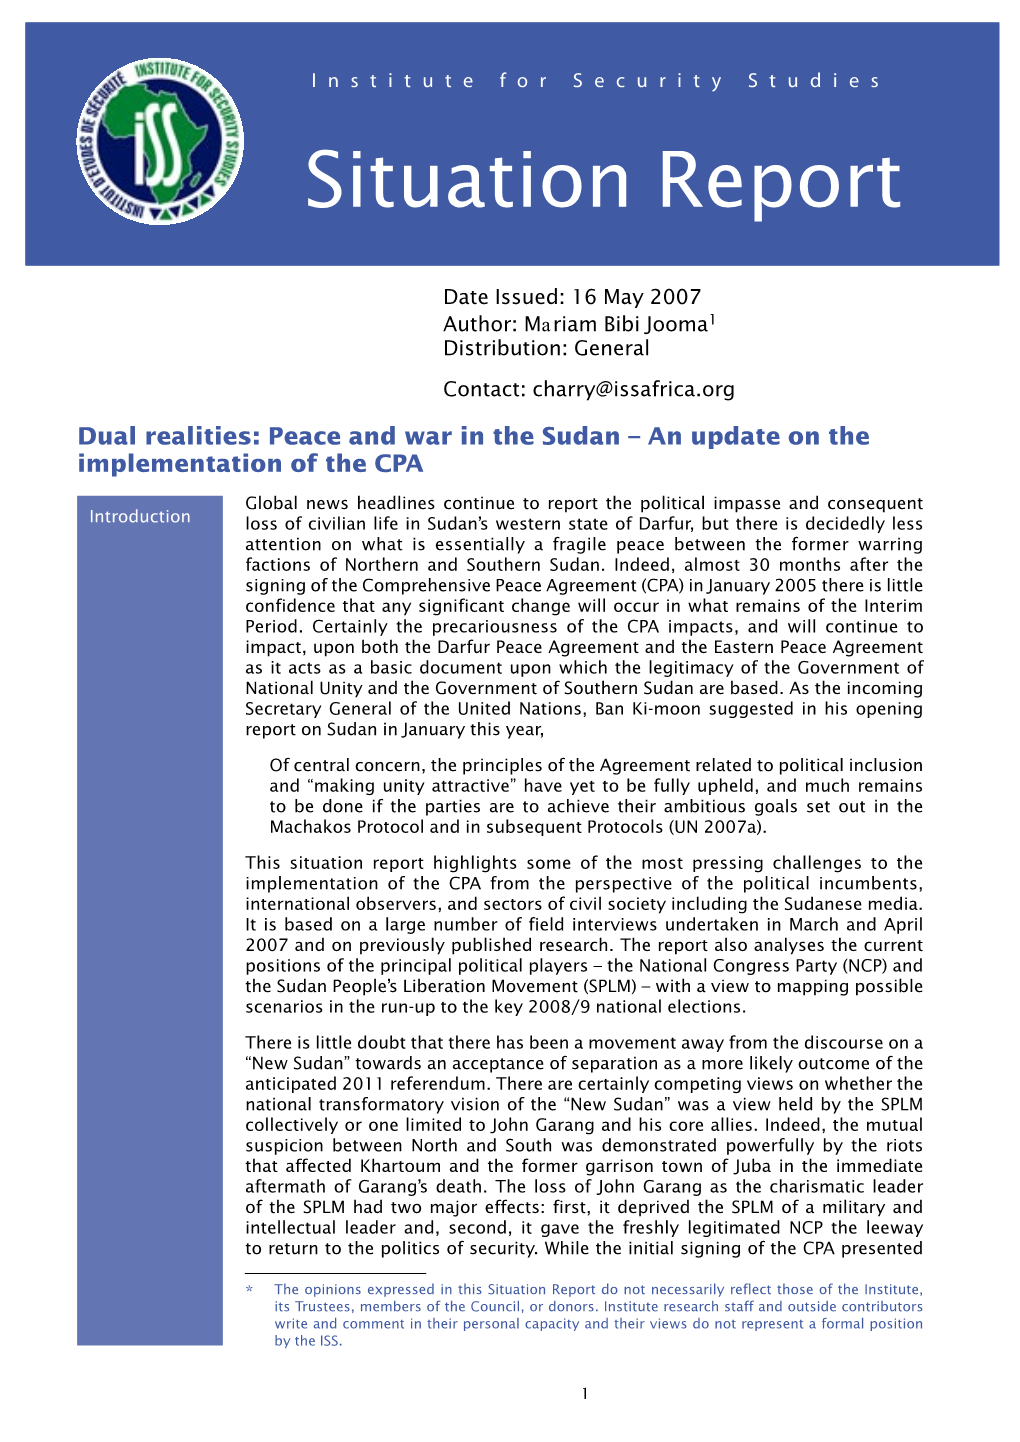 Dual Realities: Peace and War in the Sudan – an Update on the Implementation of the CPA